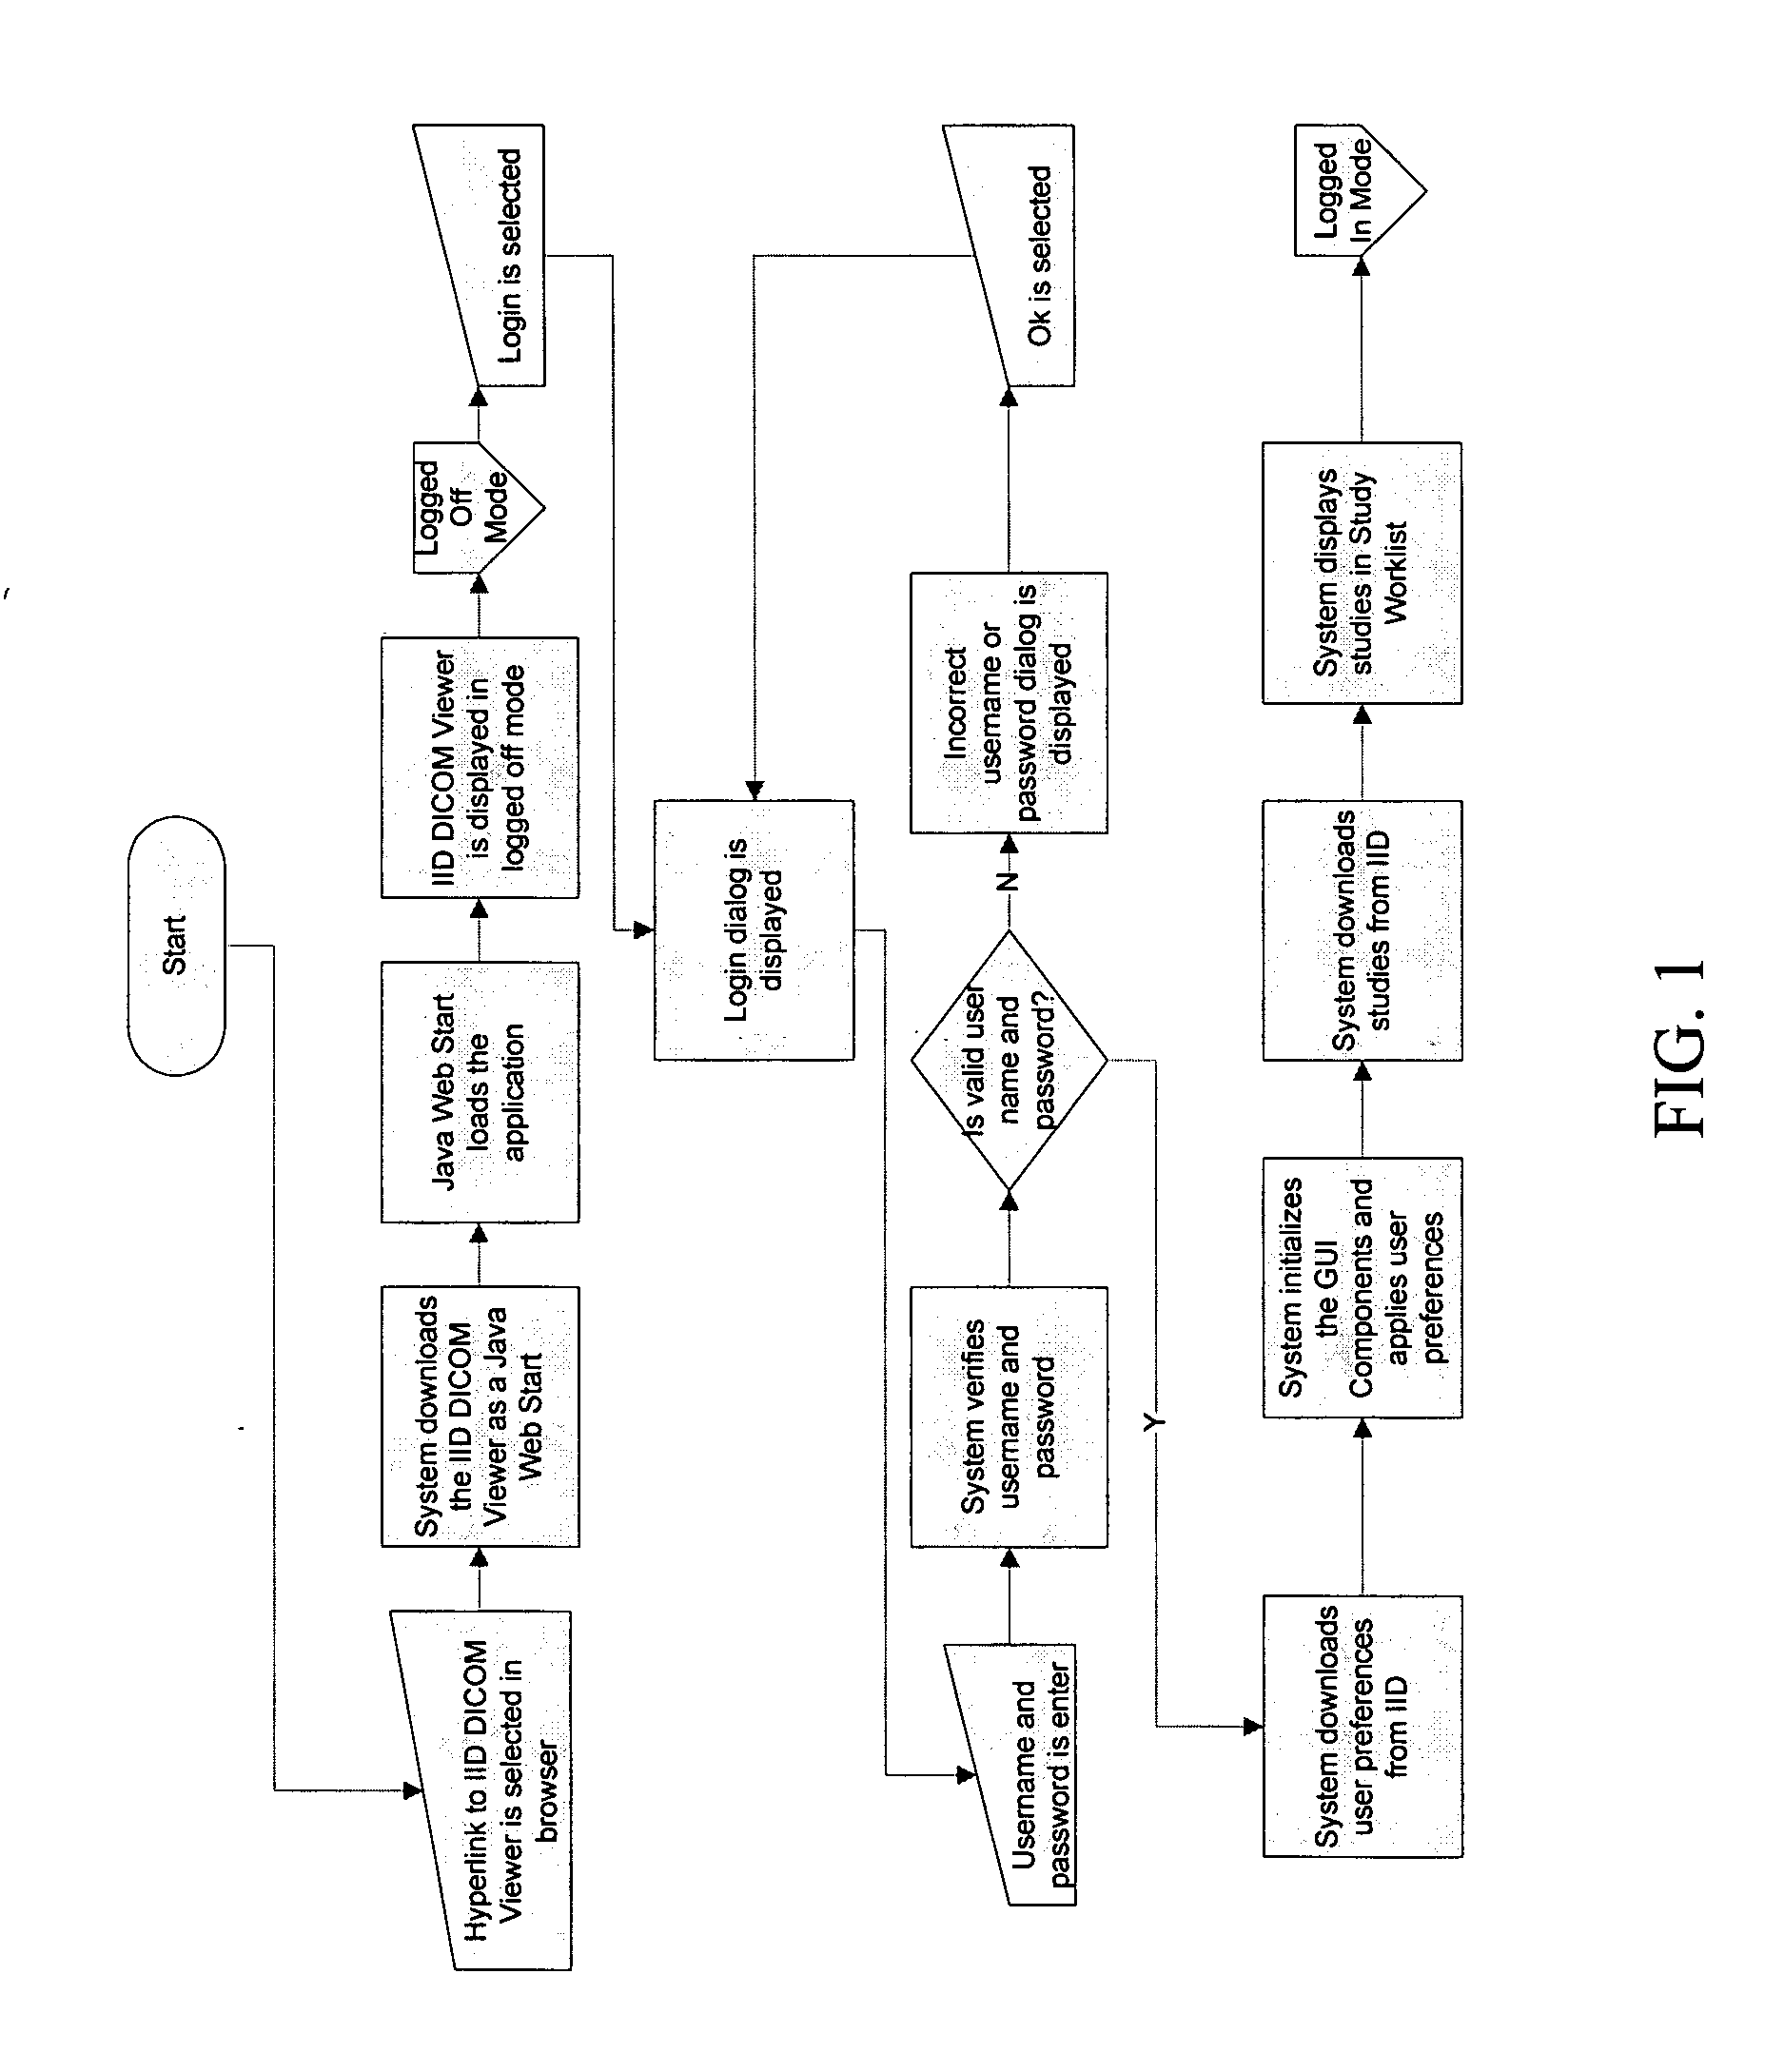 Methods and systems for providing data across a network